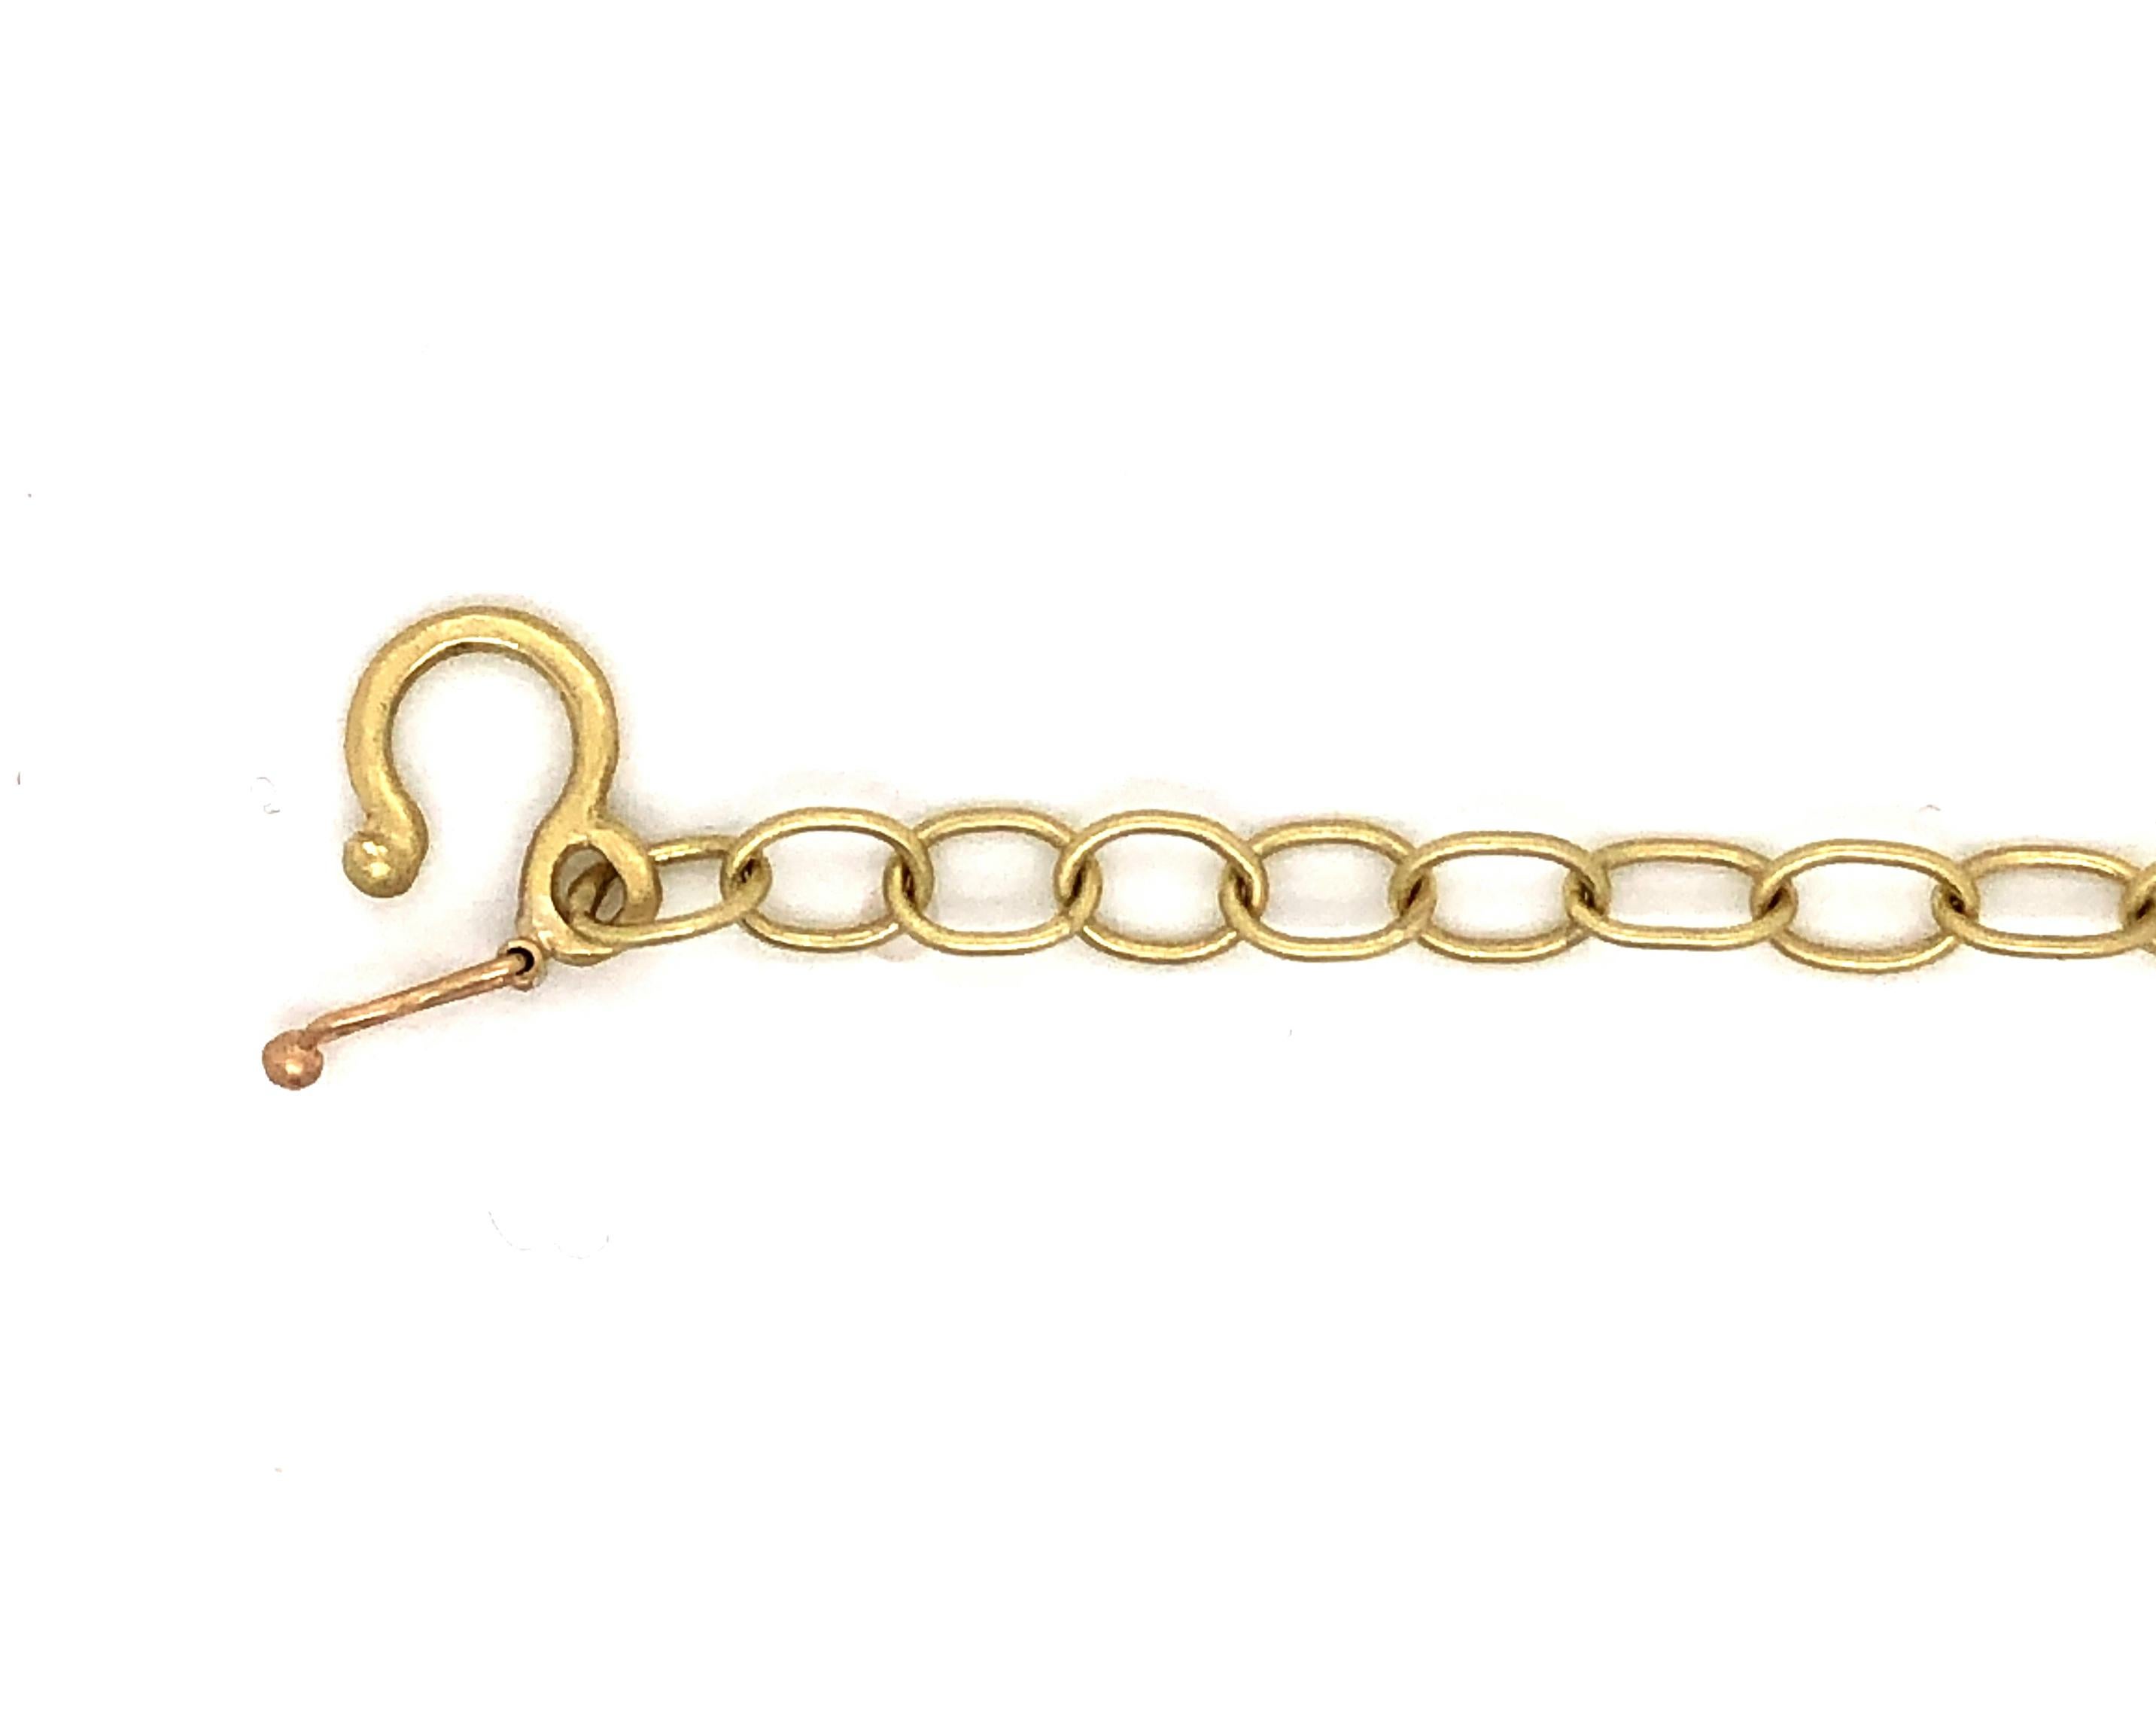 Faye Kim 18 Karat Gold Small Oval Link Chain

Classic and versatile, Faye's 18 karat gold handmade oval link chain is a must in every jewelry wardrobe. It elevates the traditional cable link chain to a new level.  Great to wear alone or as a